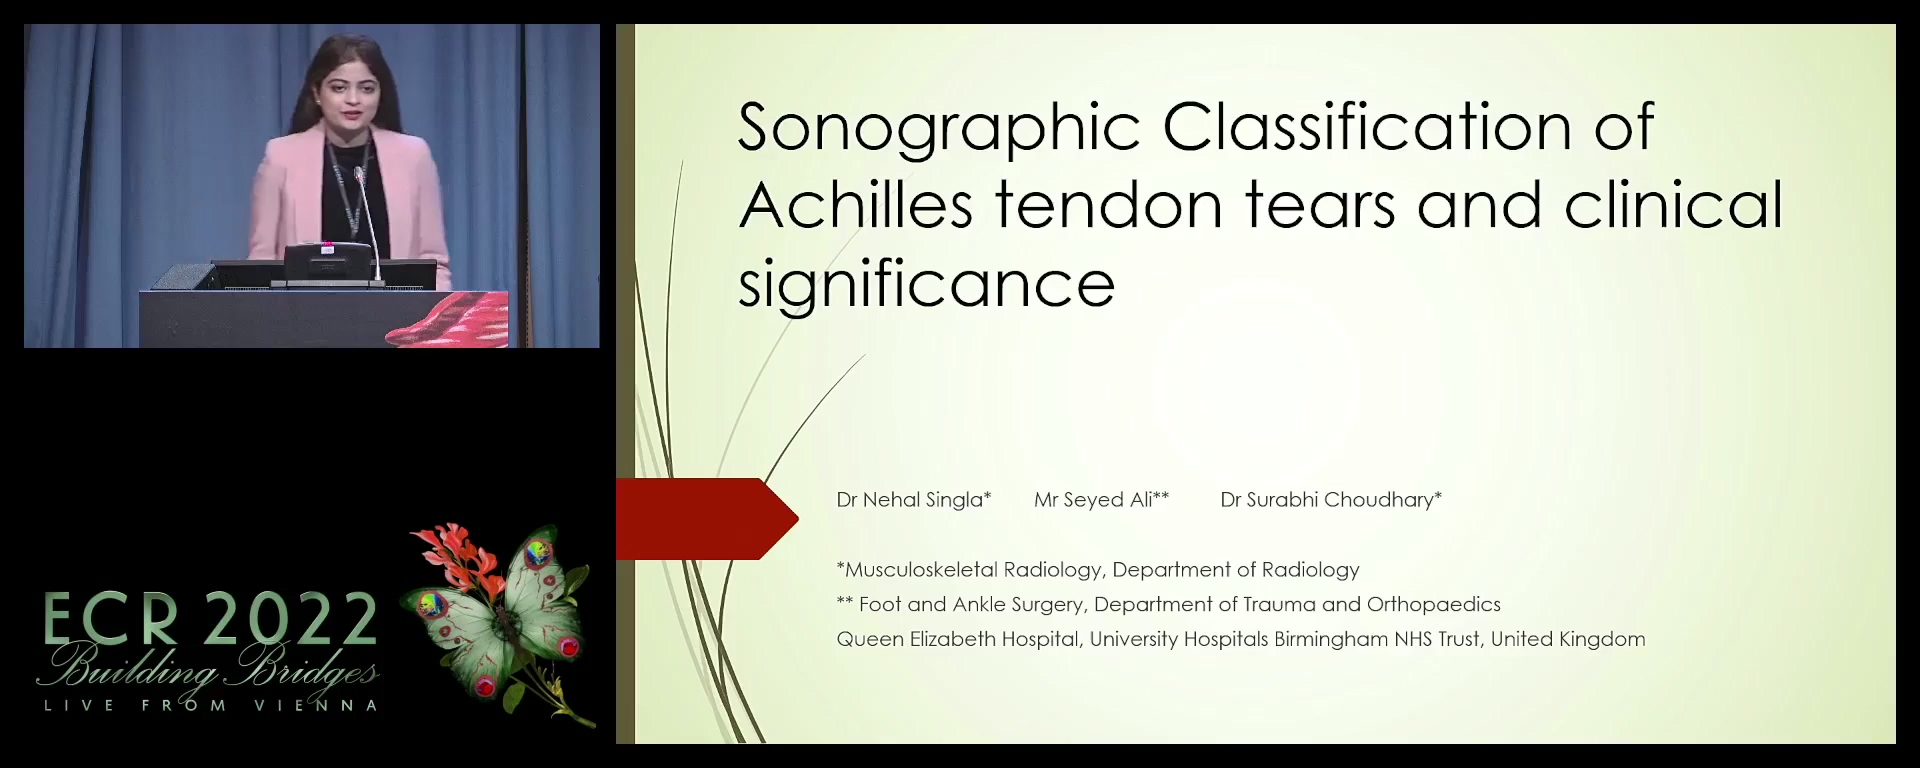 Sonographic classification of Achilles tendon tears and its clinical significance - Nehal Singla, London / UK